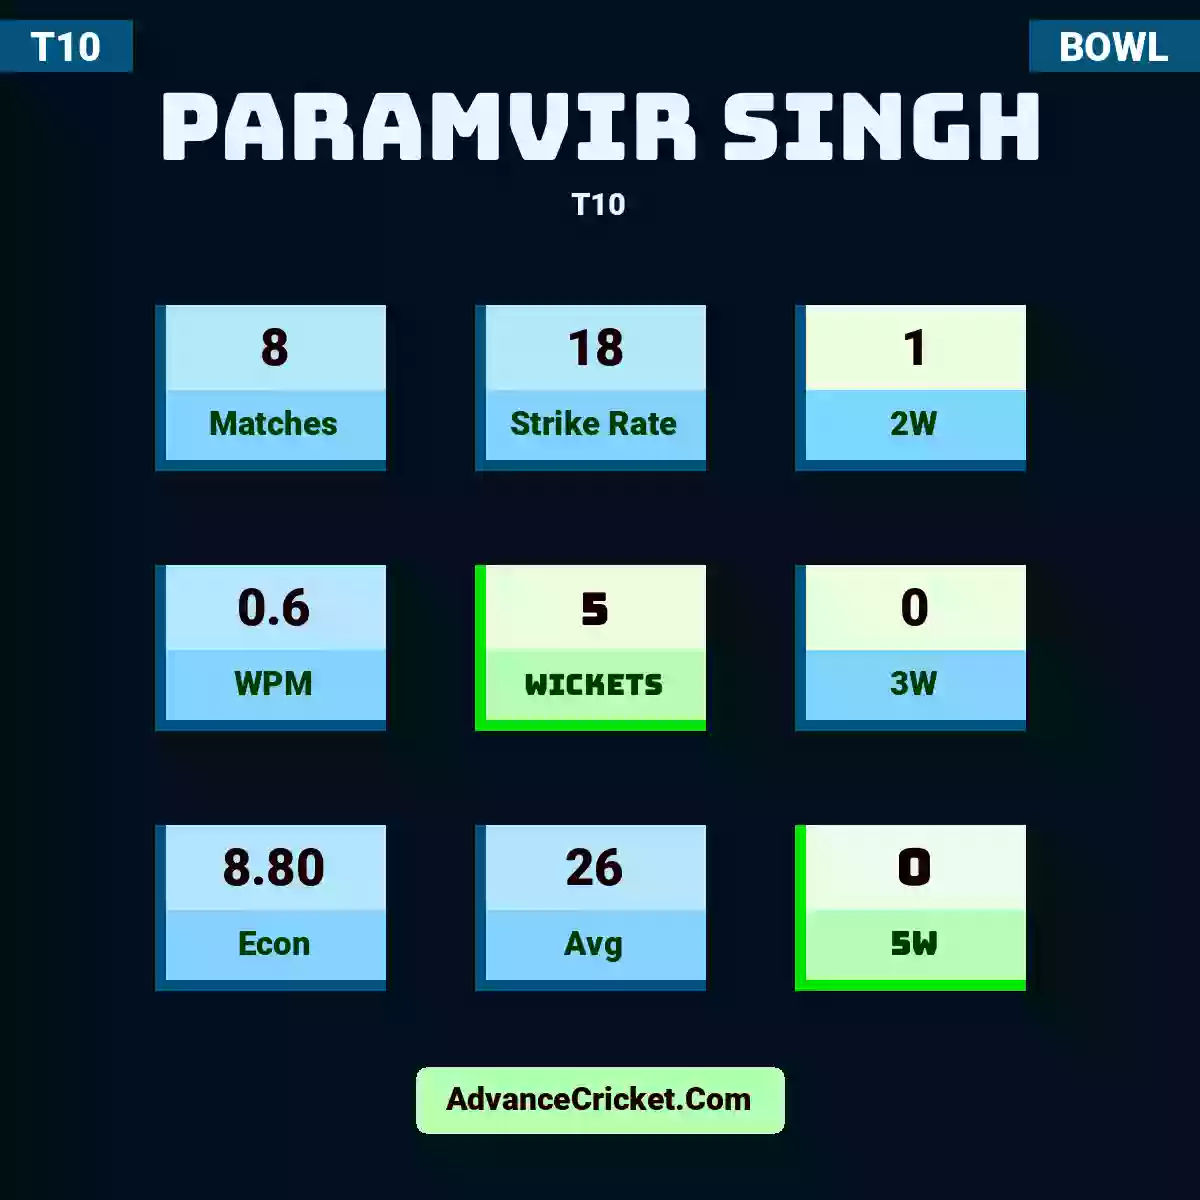 Paramvir Singh T10 , Paramvir Singh played 8 match in this T10 mode, with a SR of 18. P.Singh took 1 2W, with a WPM of 0.6. Paramvir Singh secured 5 wickets, including 0 3W hauls, with an Econ of 8.80 and Avg of 26. Additionally, P.Singh achieved 0 5W hauls.